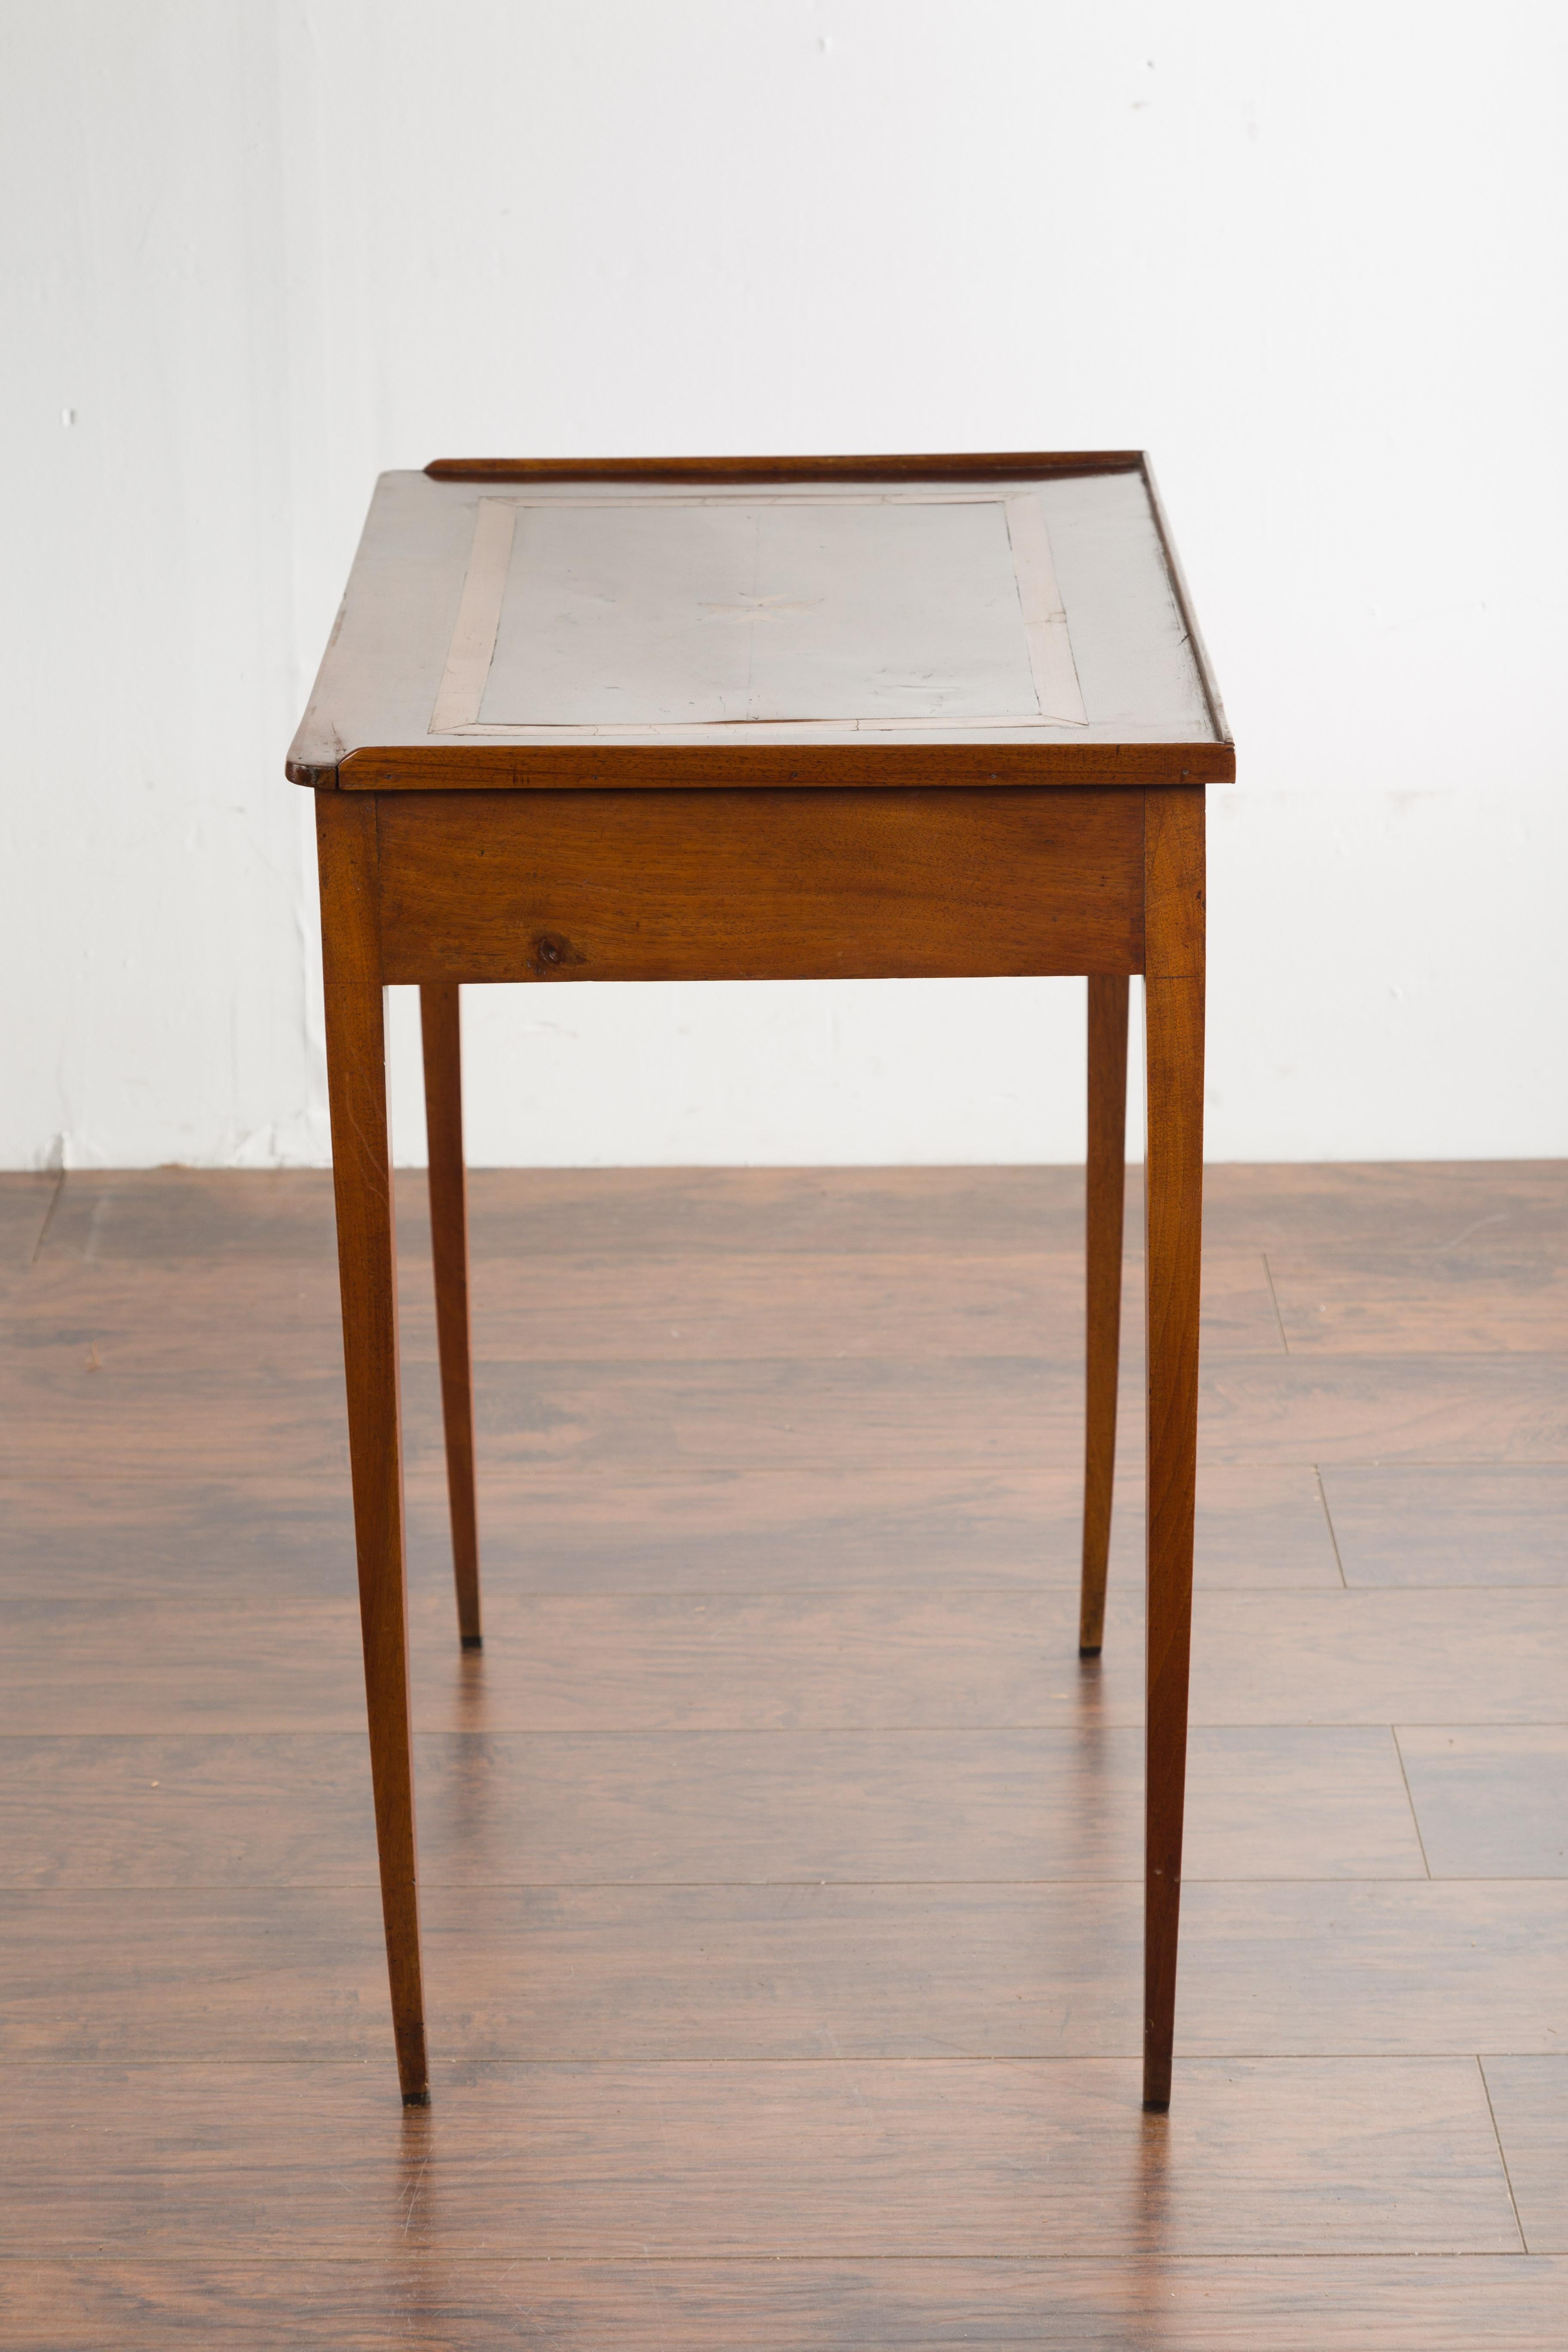 French 1870s Napoléon III Walnut Side Table with Star Inlay and Single Drawer For Sale 15